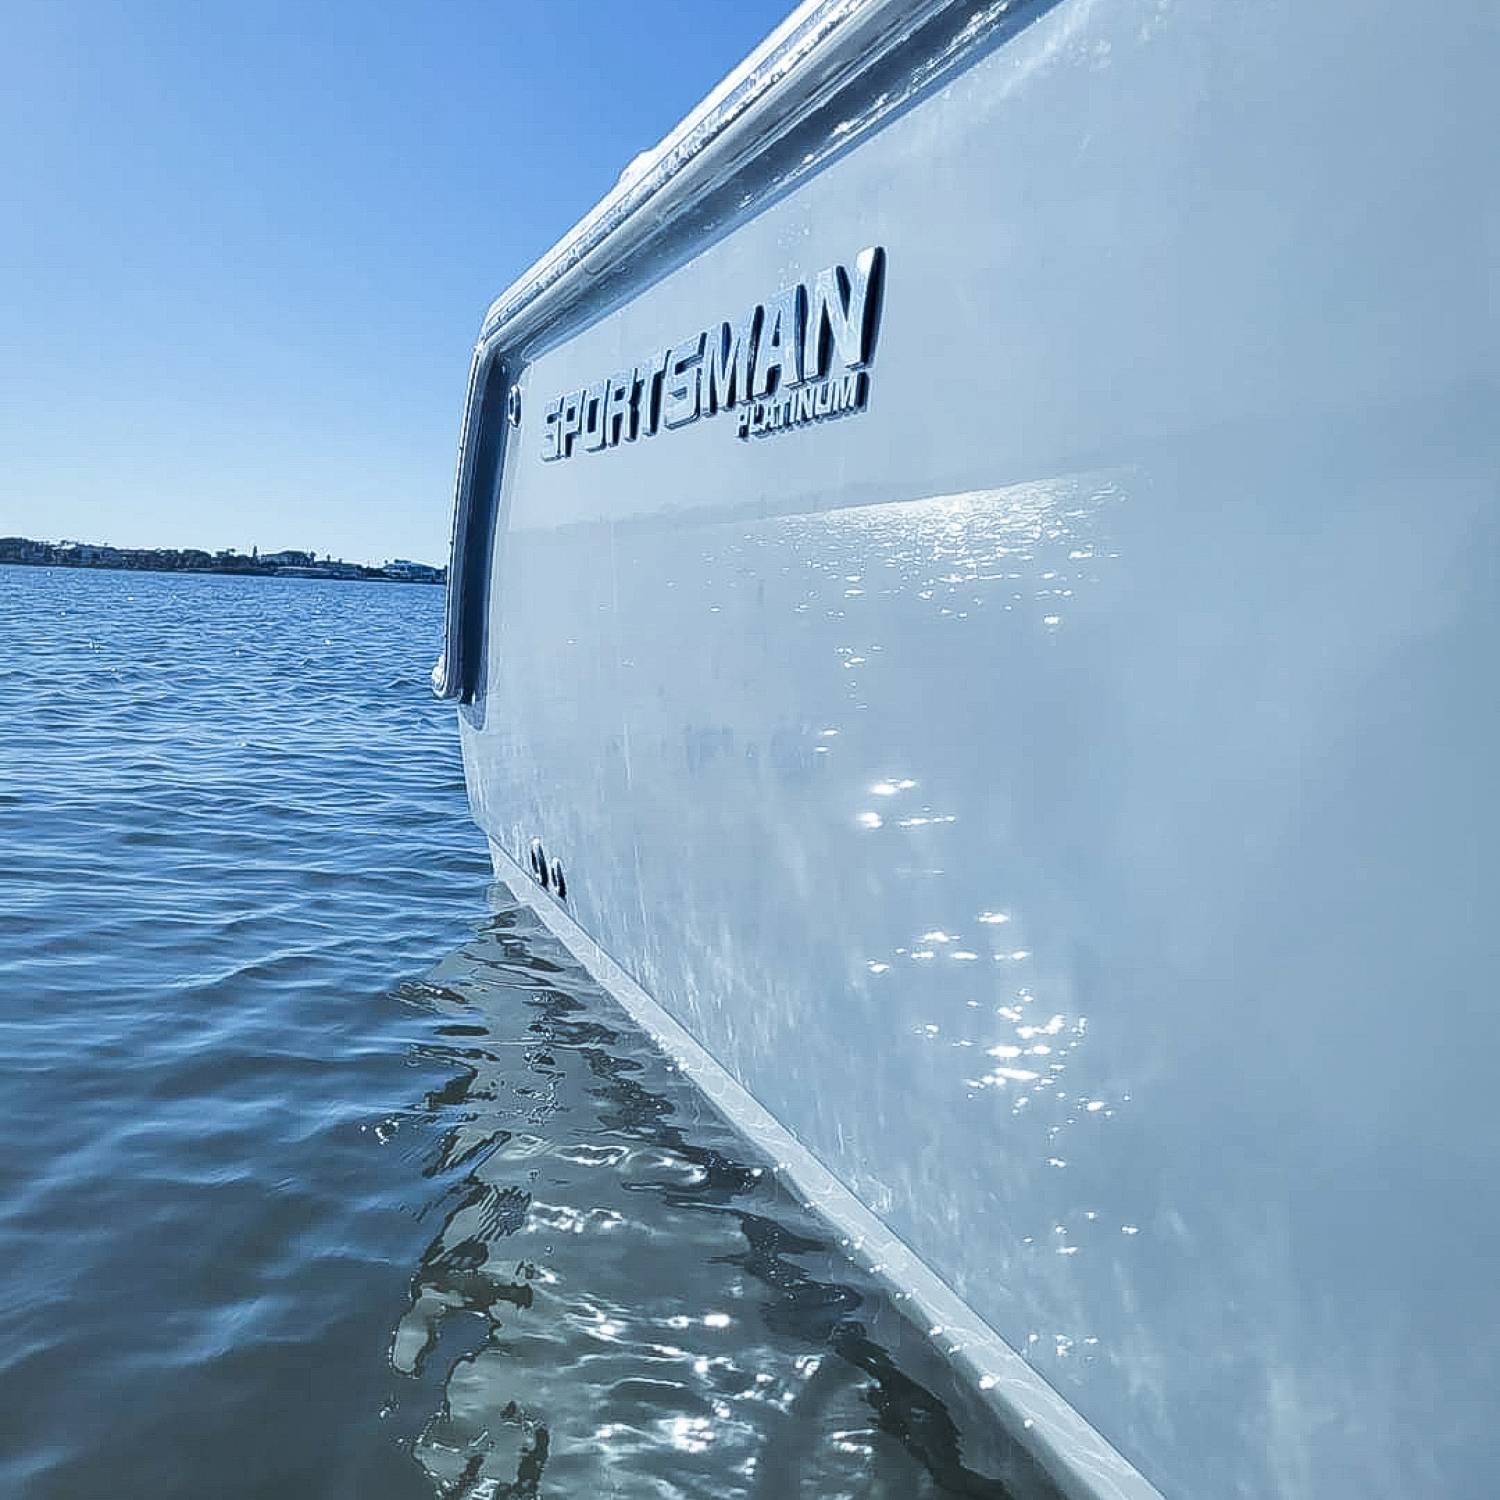 Title: SBO Reflections 💦☀️ - On board their Sportsman Open 232 Center Console - Location: St. Augustine, Florida. Participating in the Photo Contest #SportsmanJanuary2023